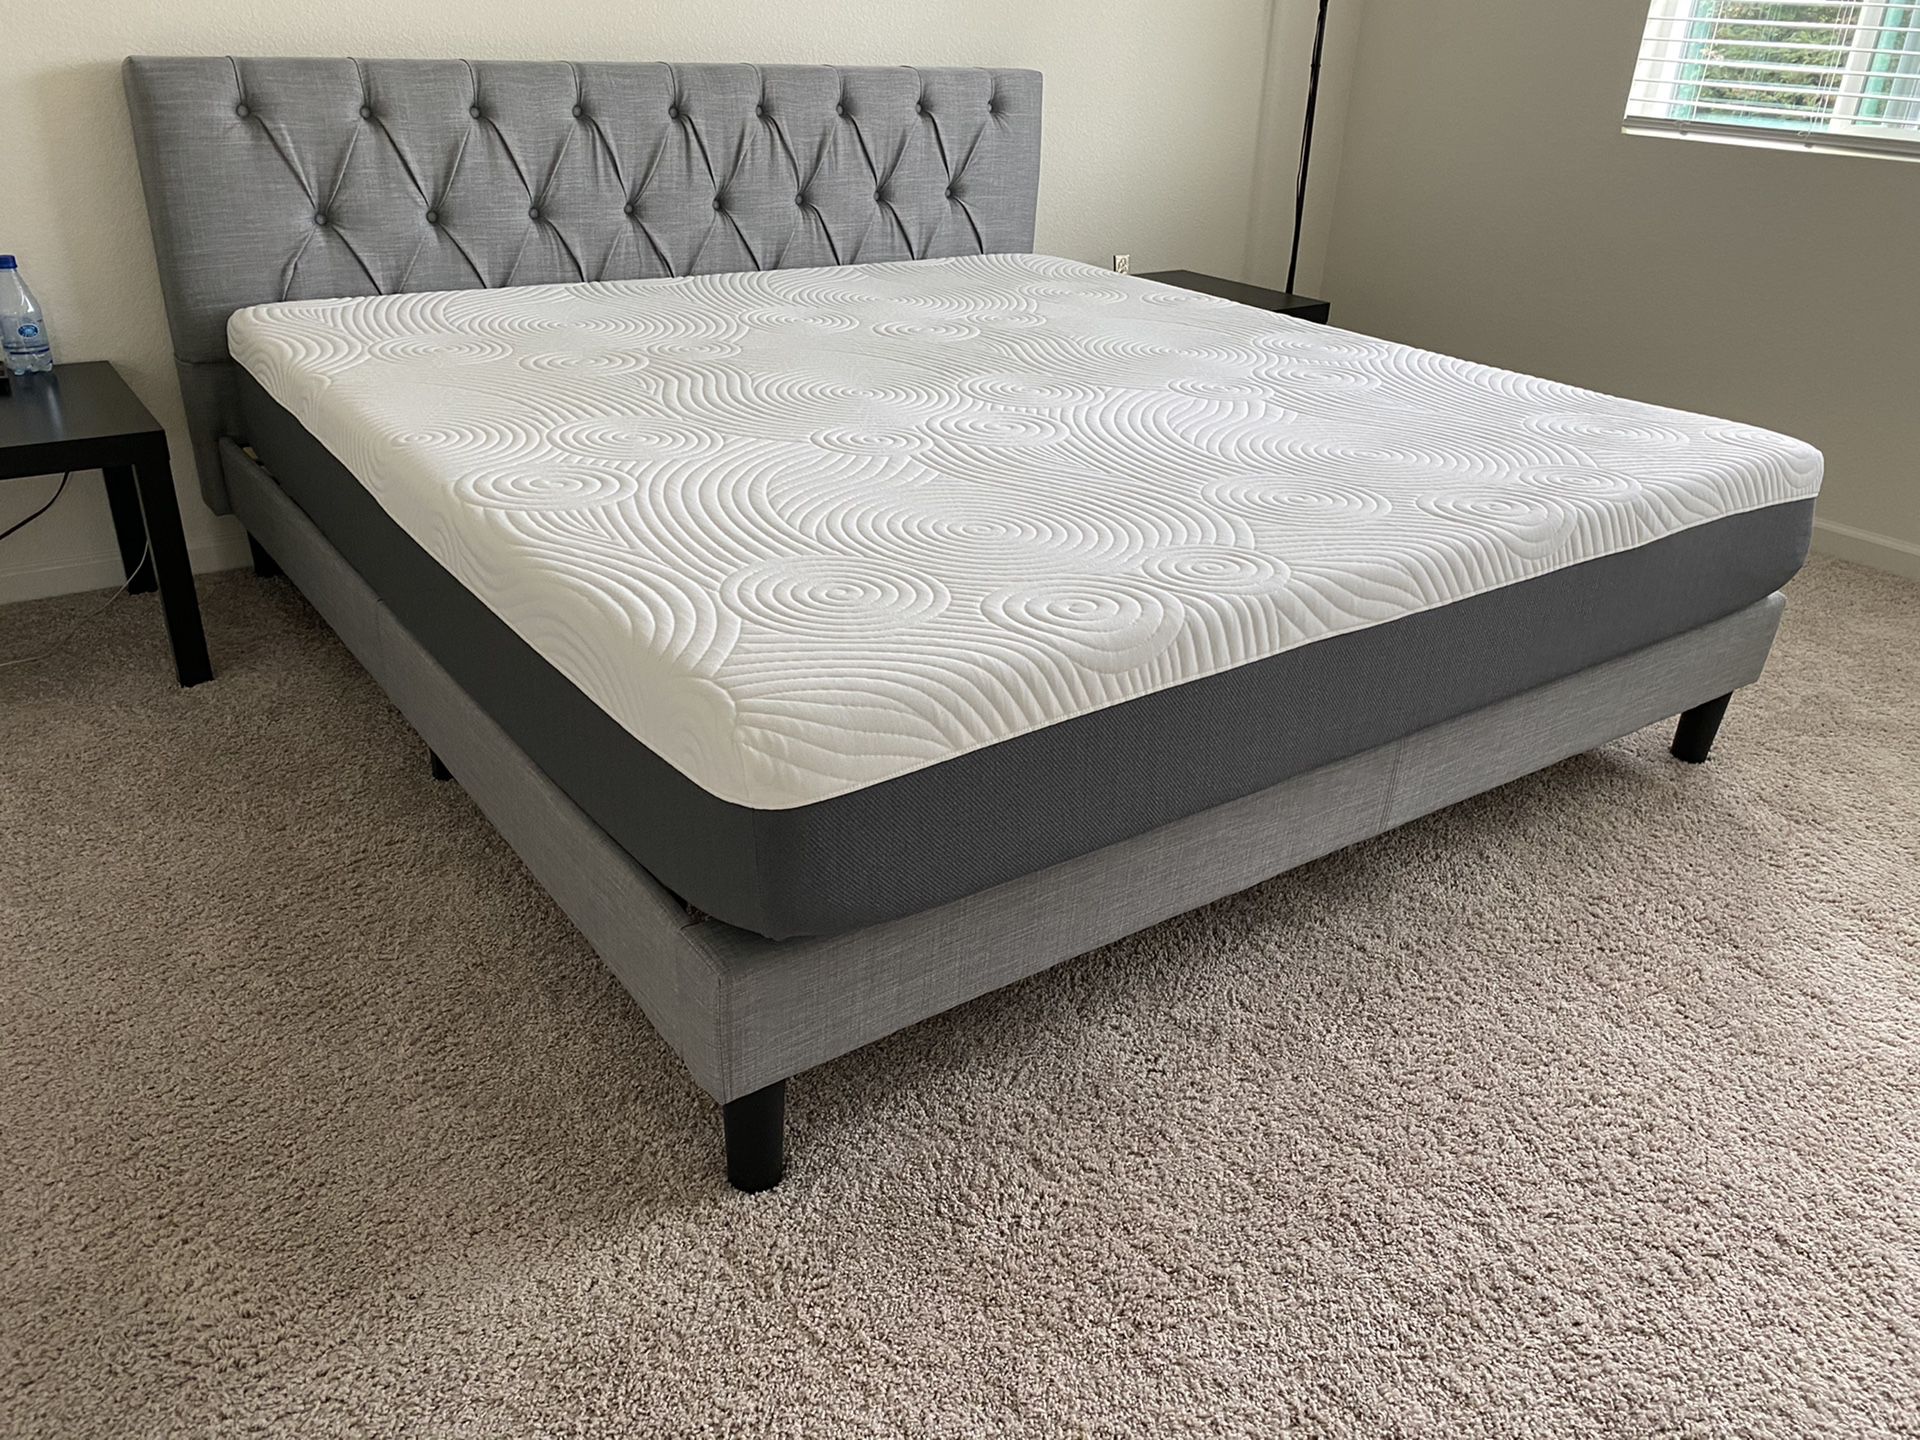 King Size Bed ! King size mattress frame ! Blackstone bed ! Tufted headboard ! King bed ! Free delivery